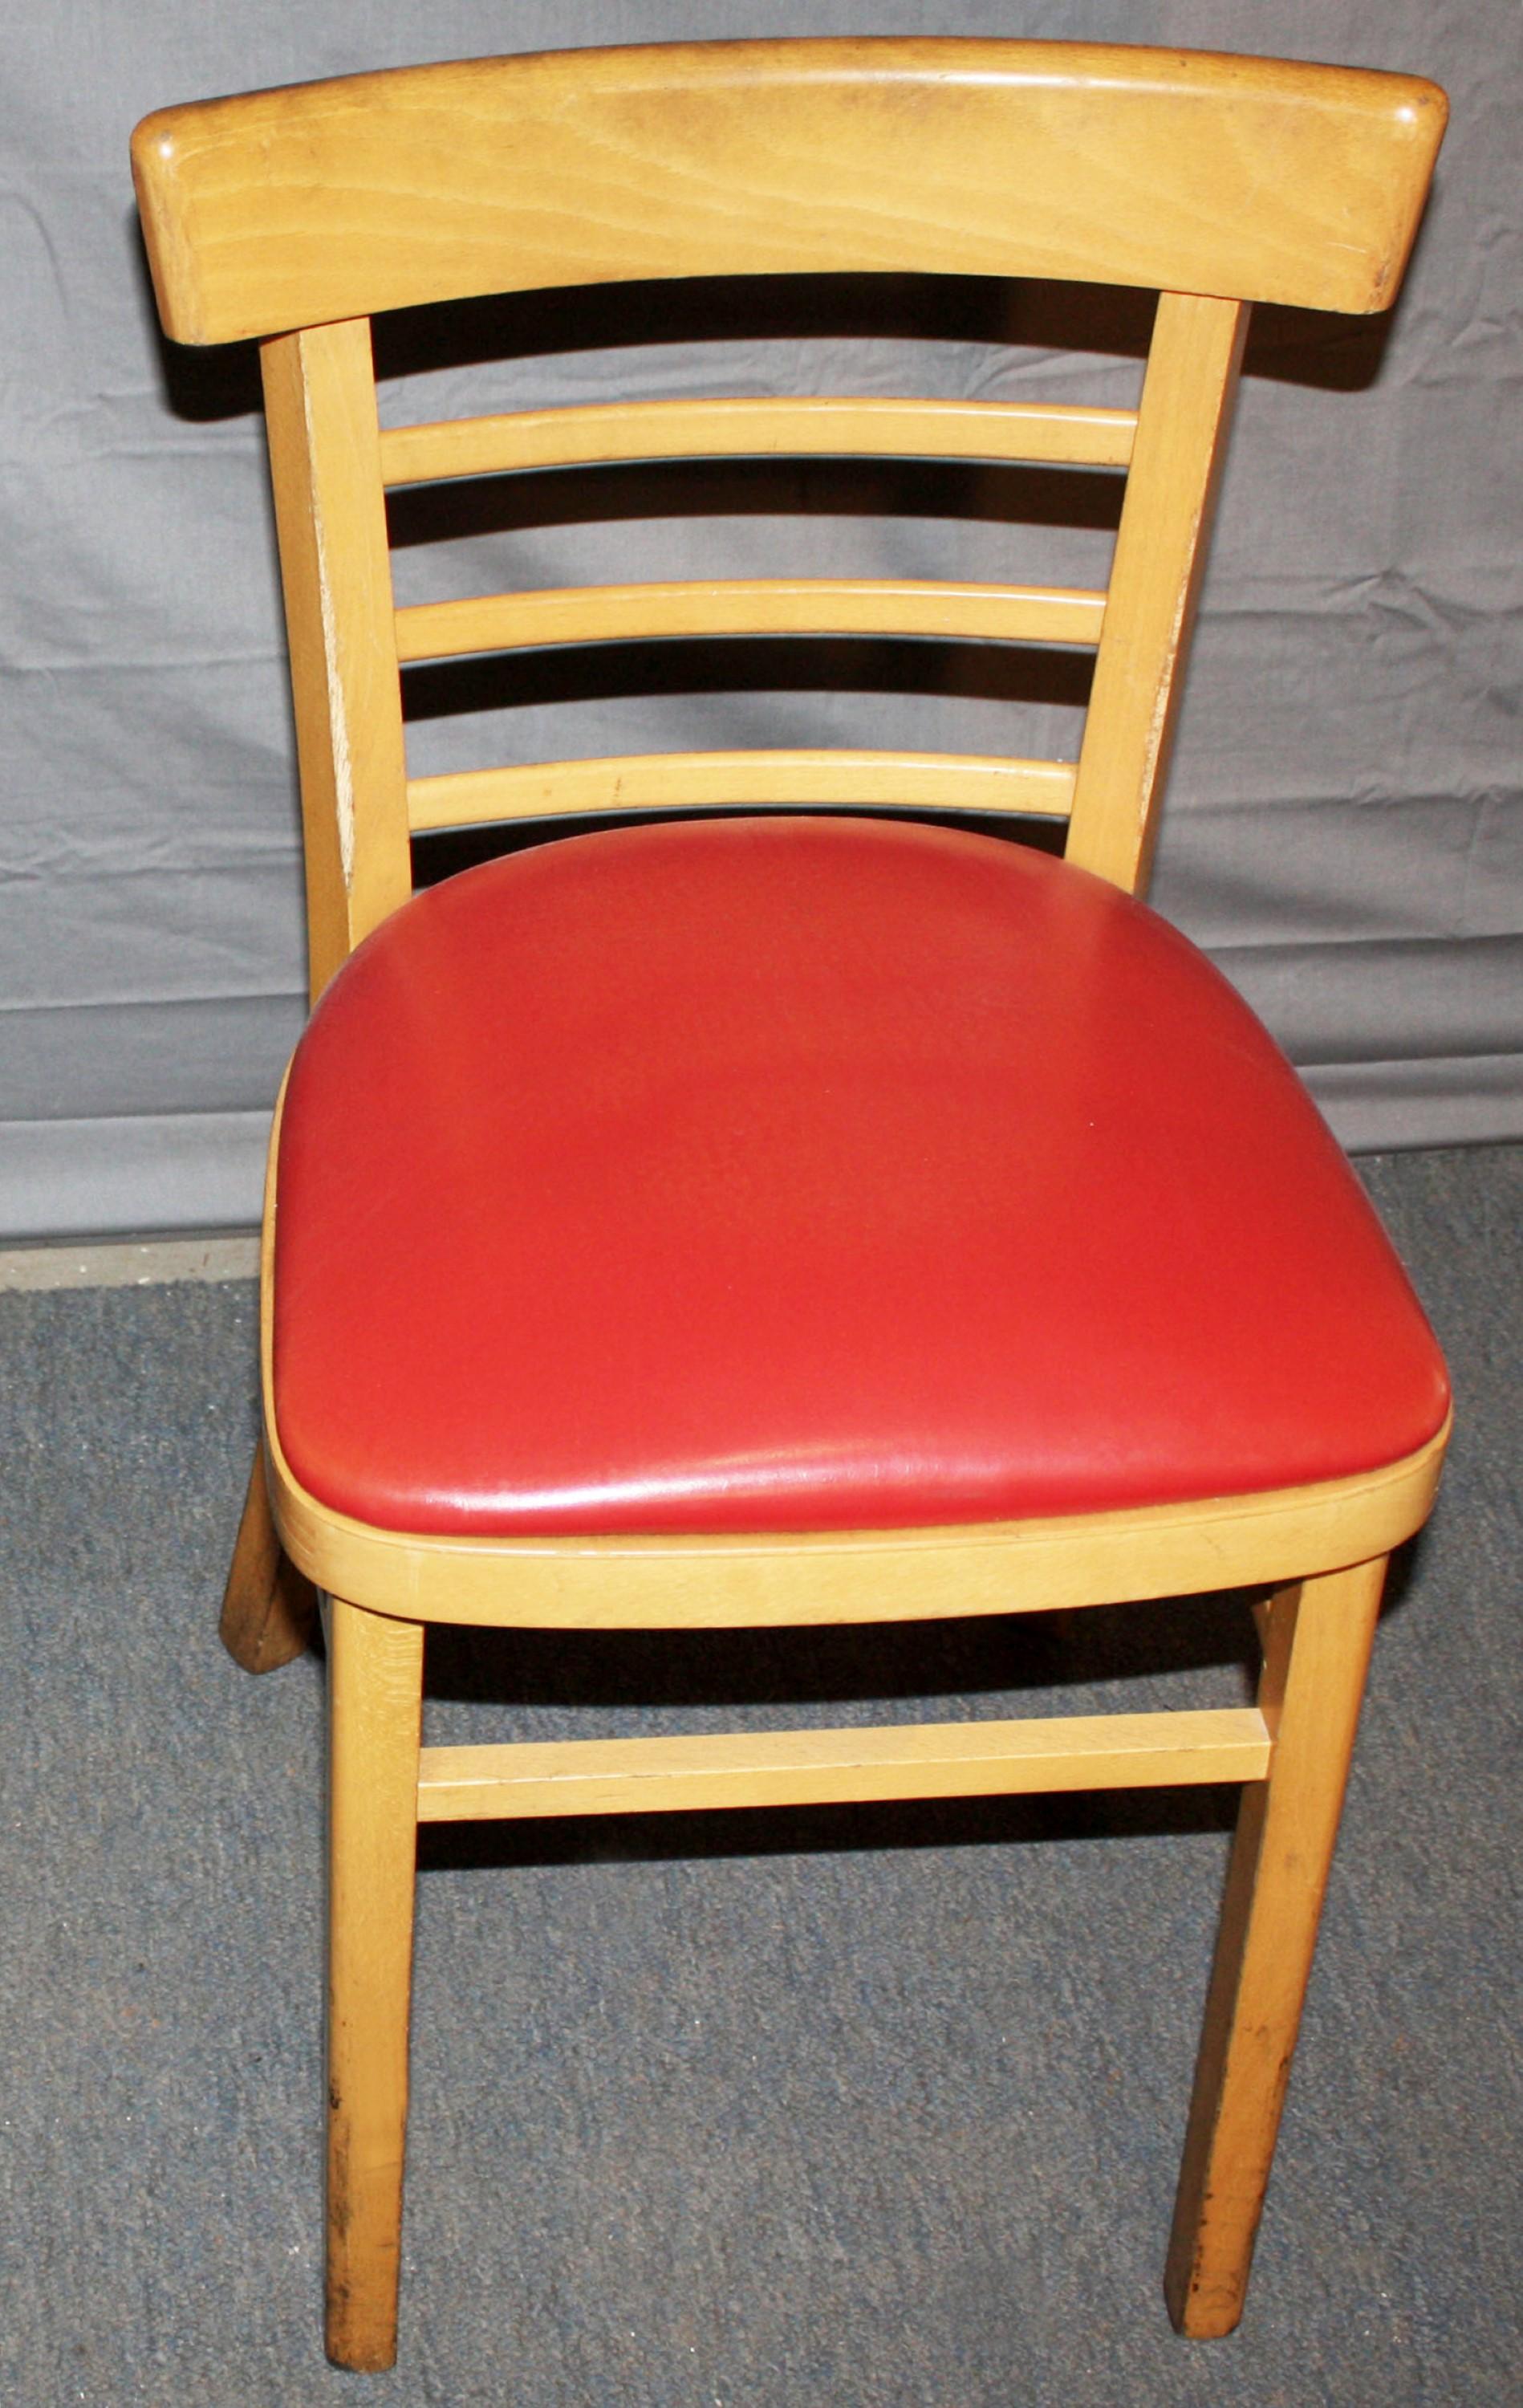 Chair made of light tone maple with a red vinyl seat. Small quantity available at time of posting. Please inquire. Priced each. Please note, this item is located in one of our NYC locations.